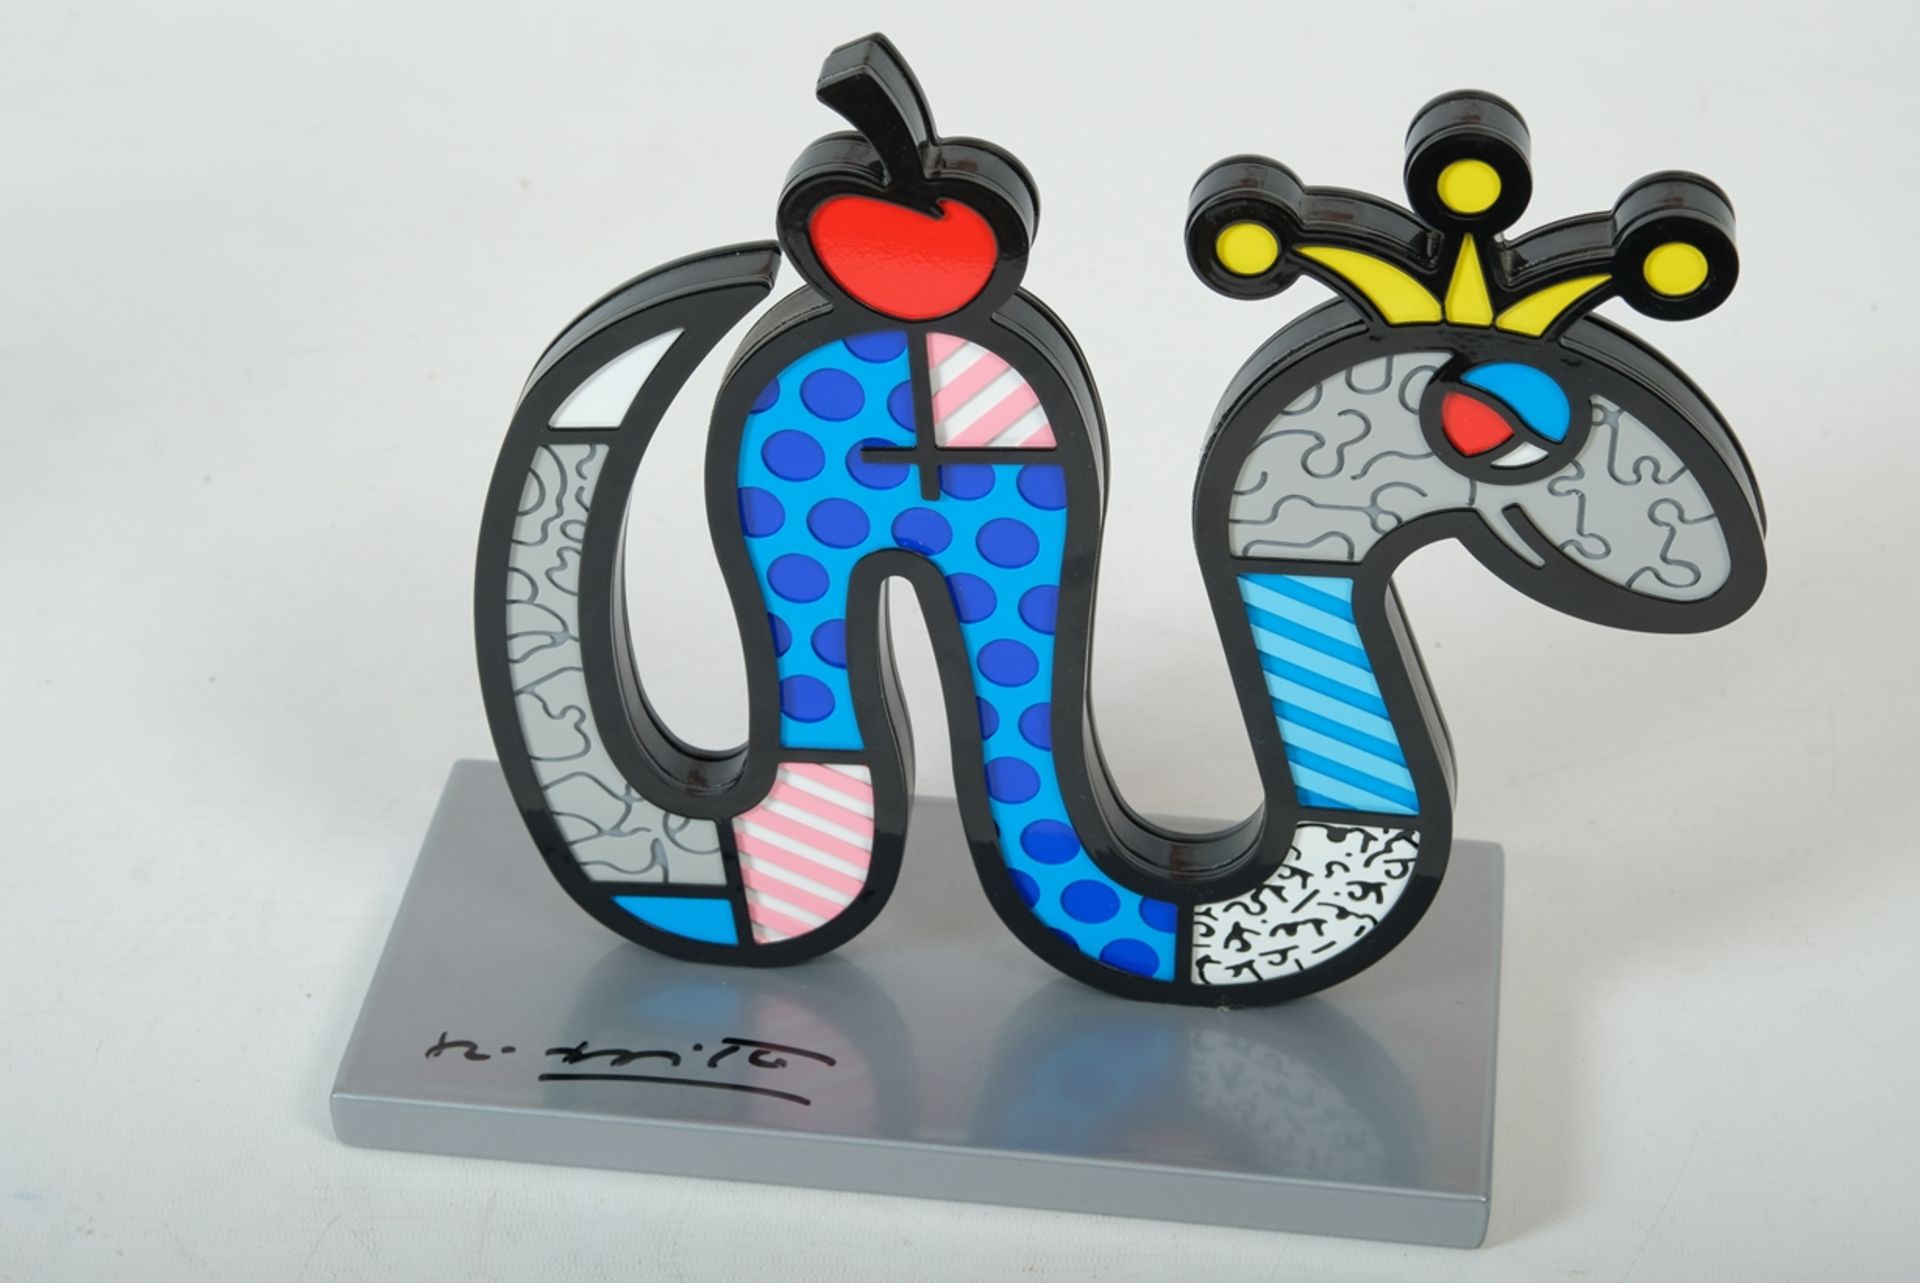 Britto, Romero (born 1963) "Tiny Temptation - Silver Edition", sculpture of a snake, colourful with - Image 3 of 3